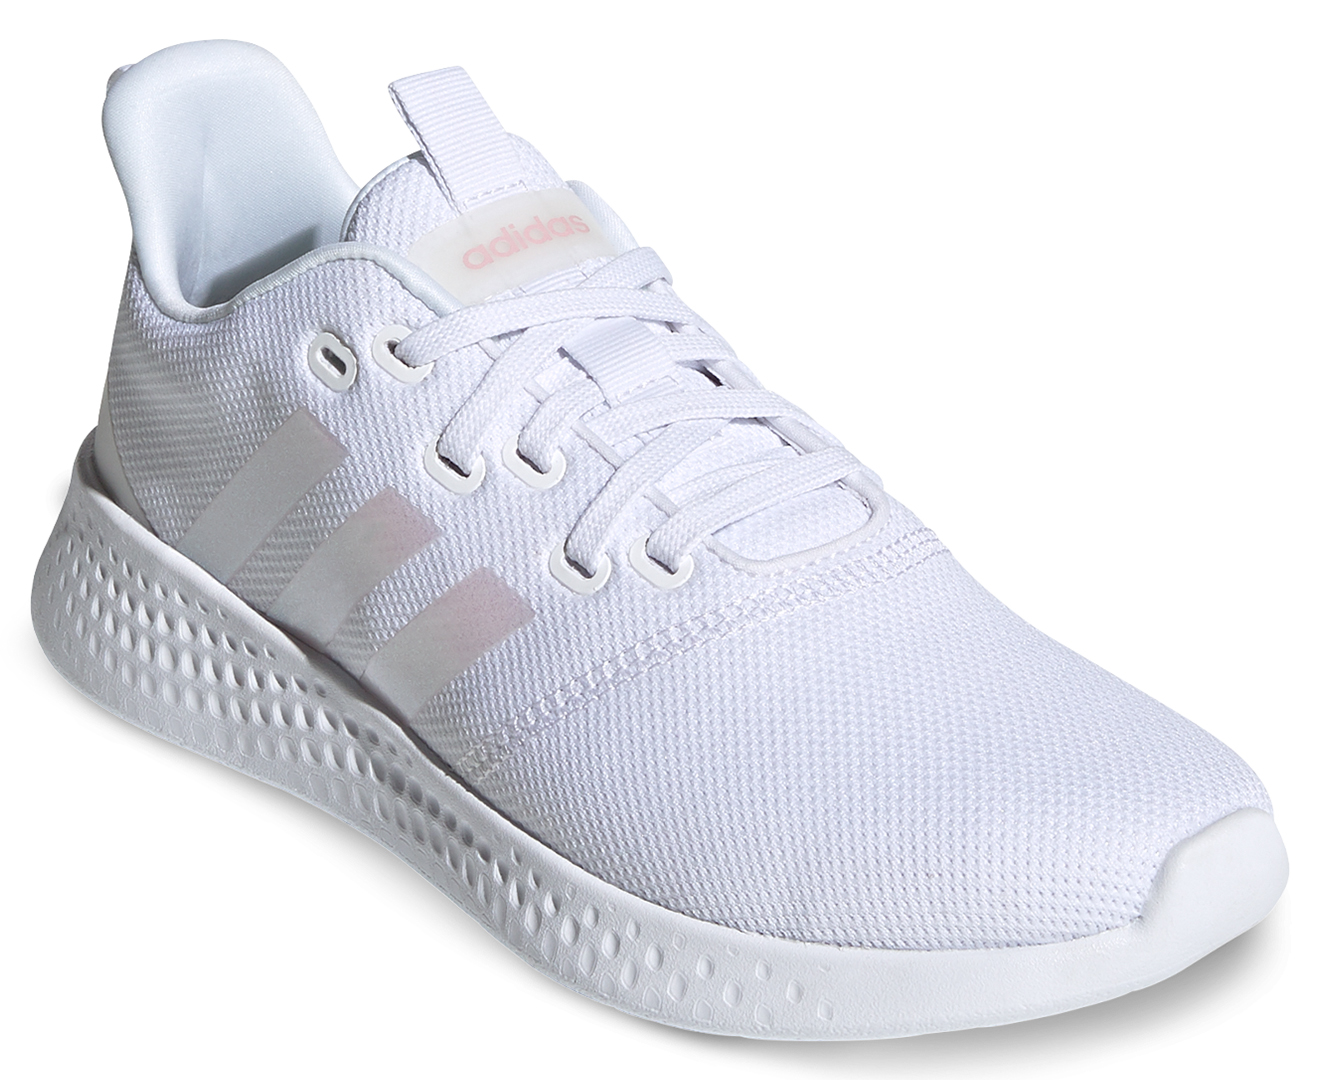 Adidas Women's Puremotion Shoes - White/Iridescent/Clear Pink | Catch ...